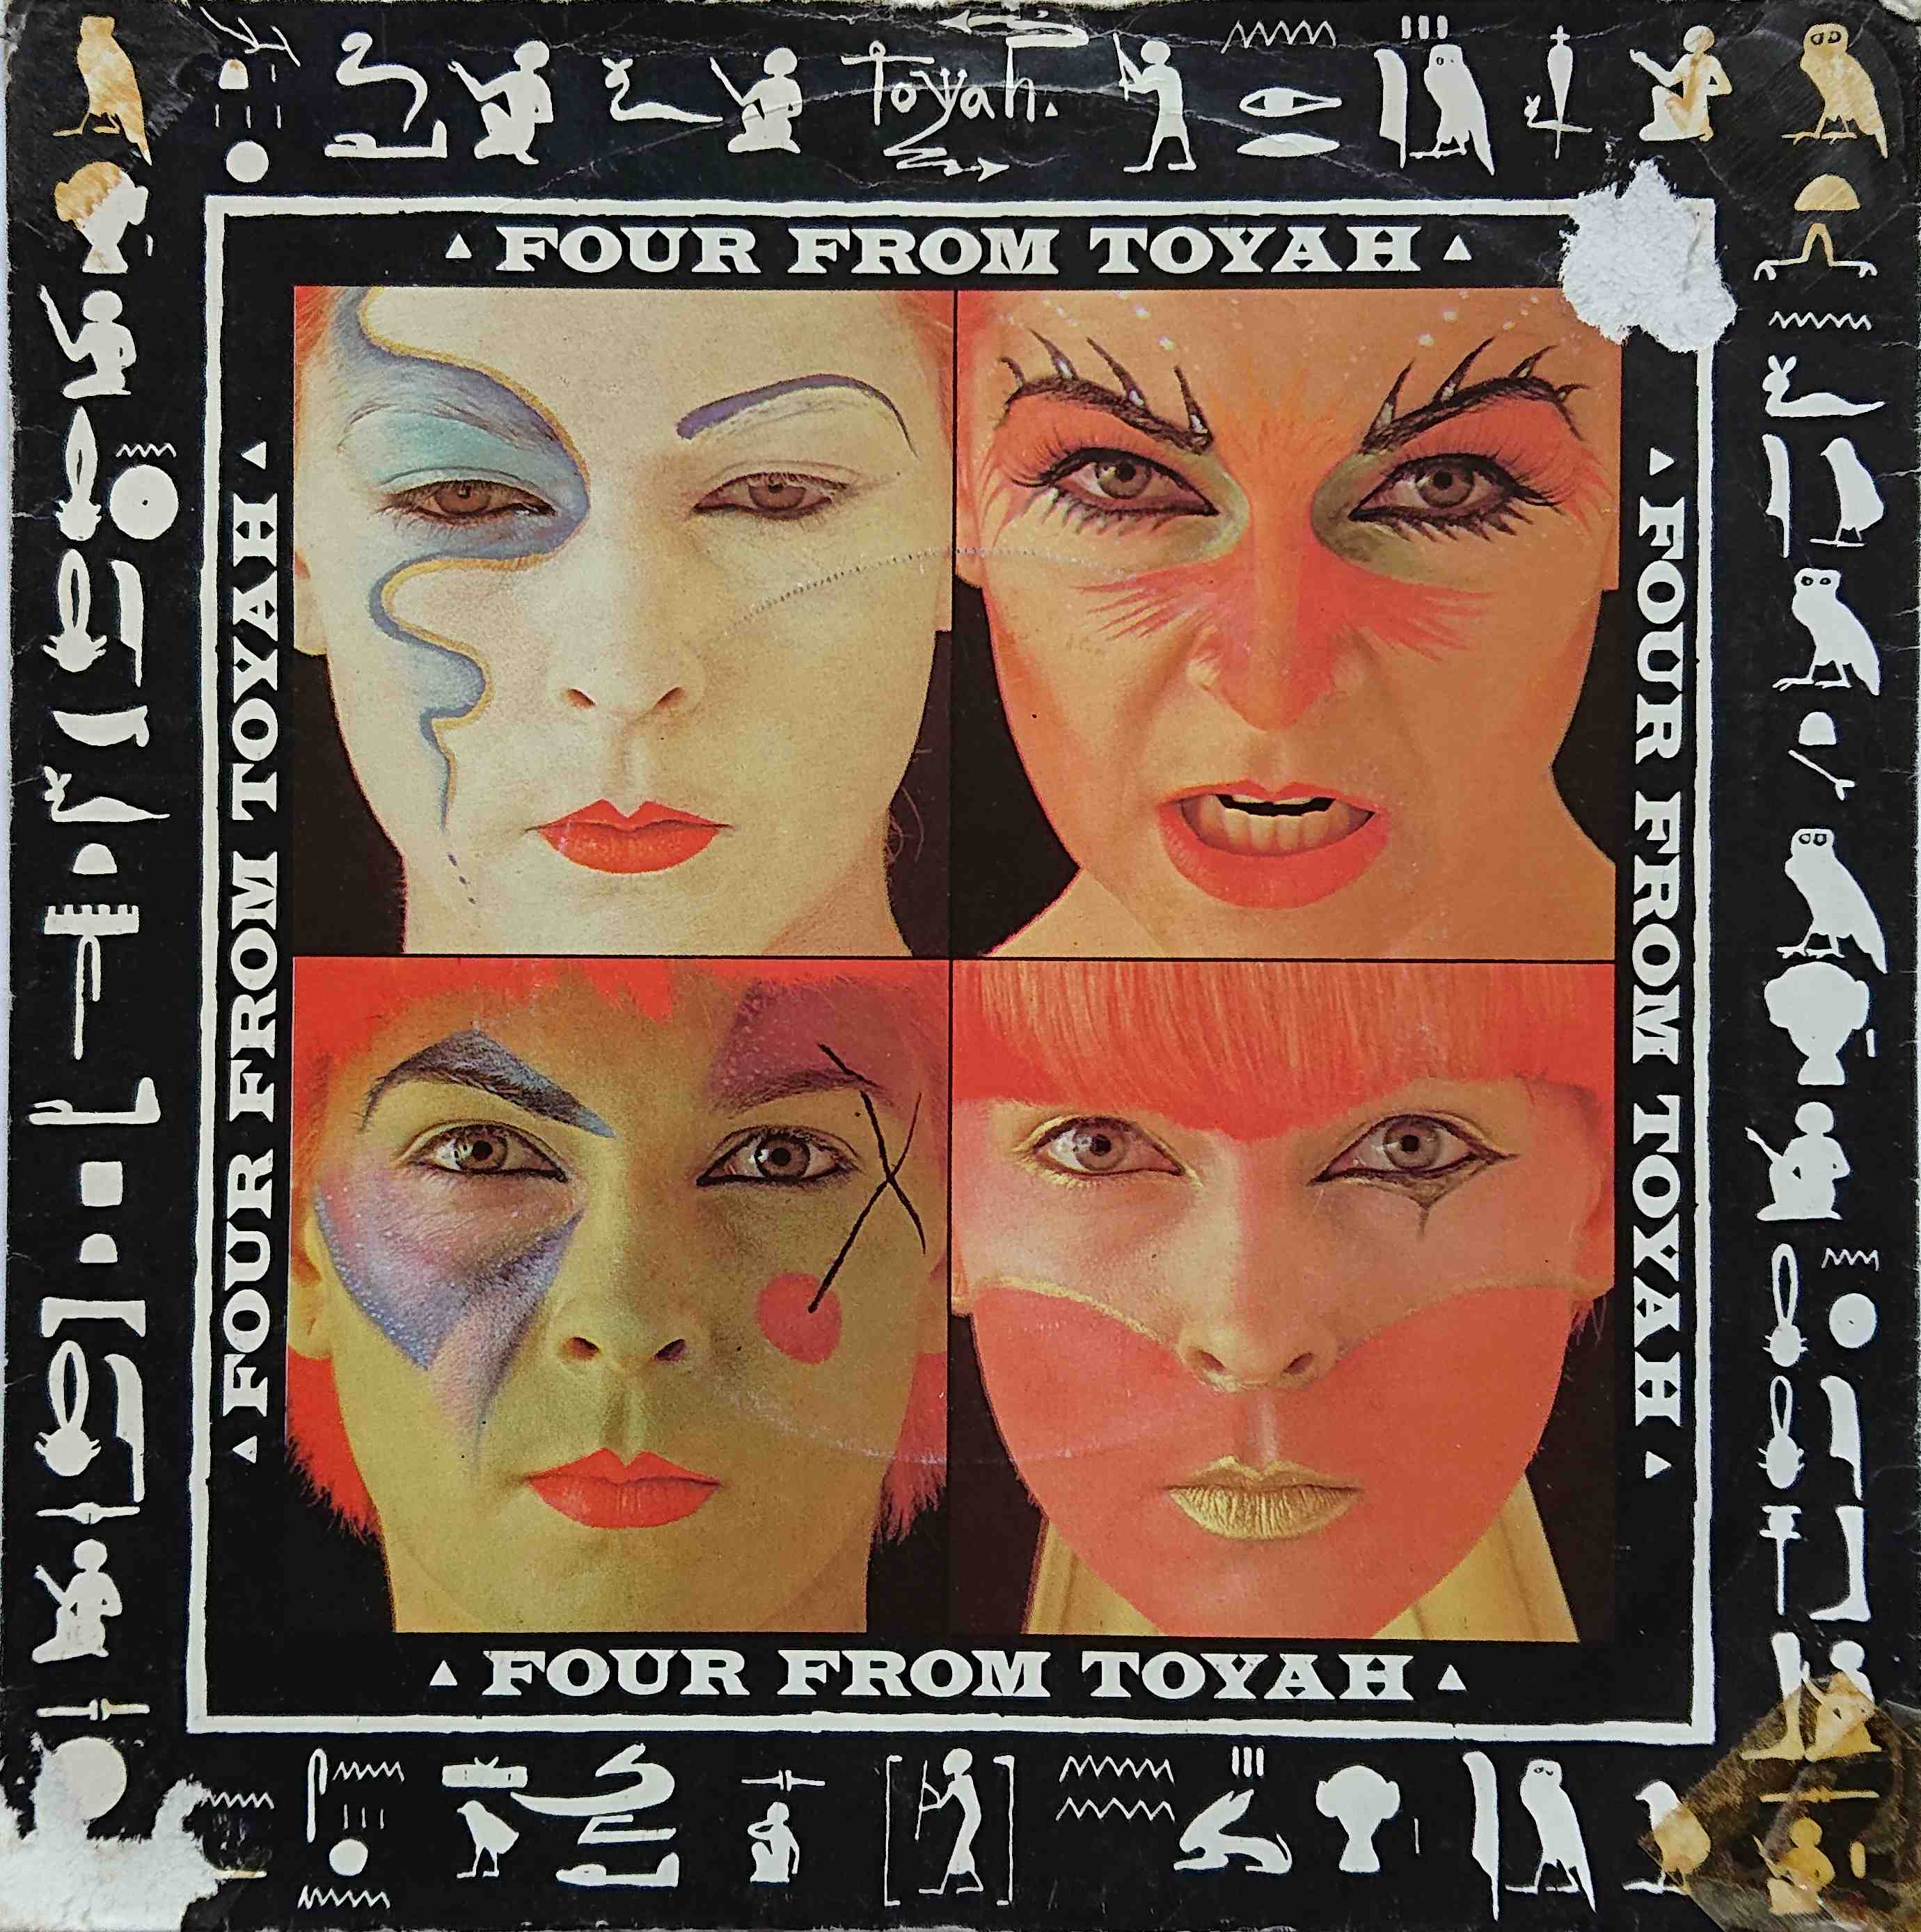 Picture of Four from Toyah by artist Toyah Willcox 